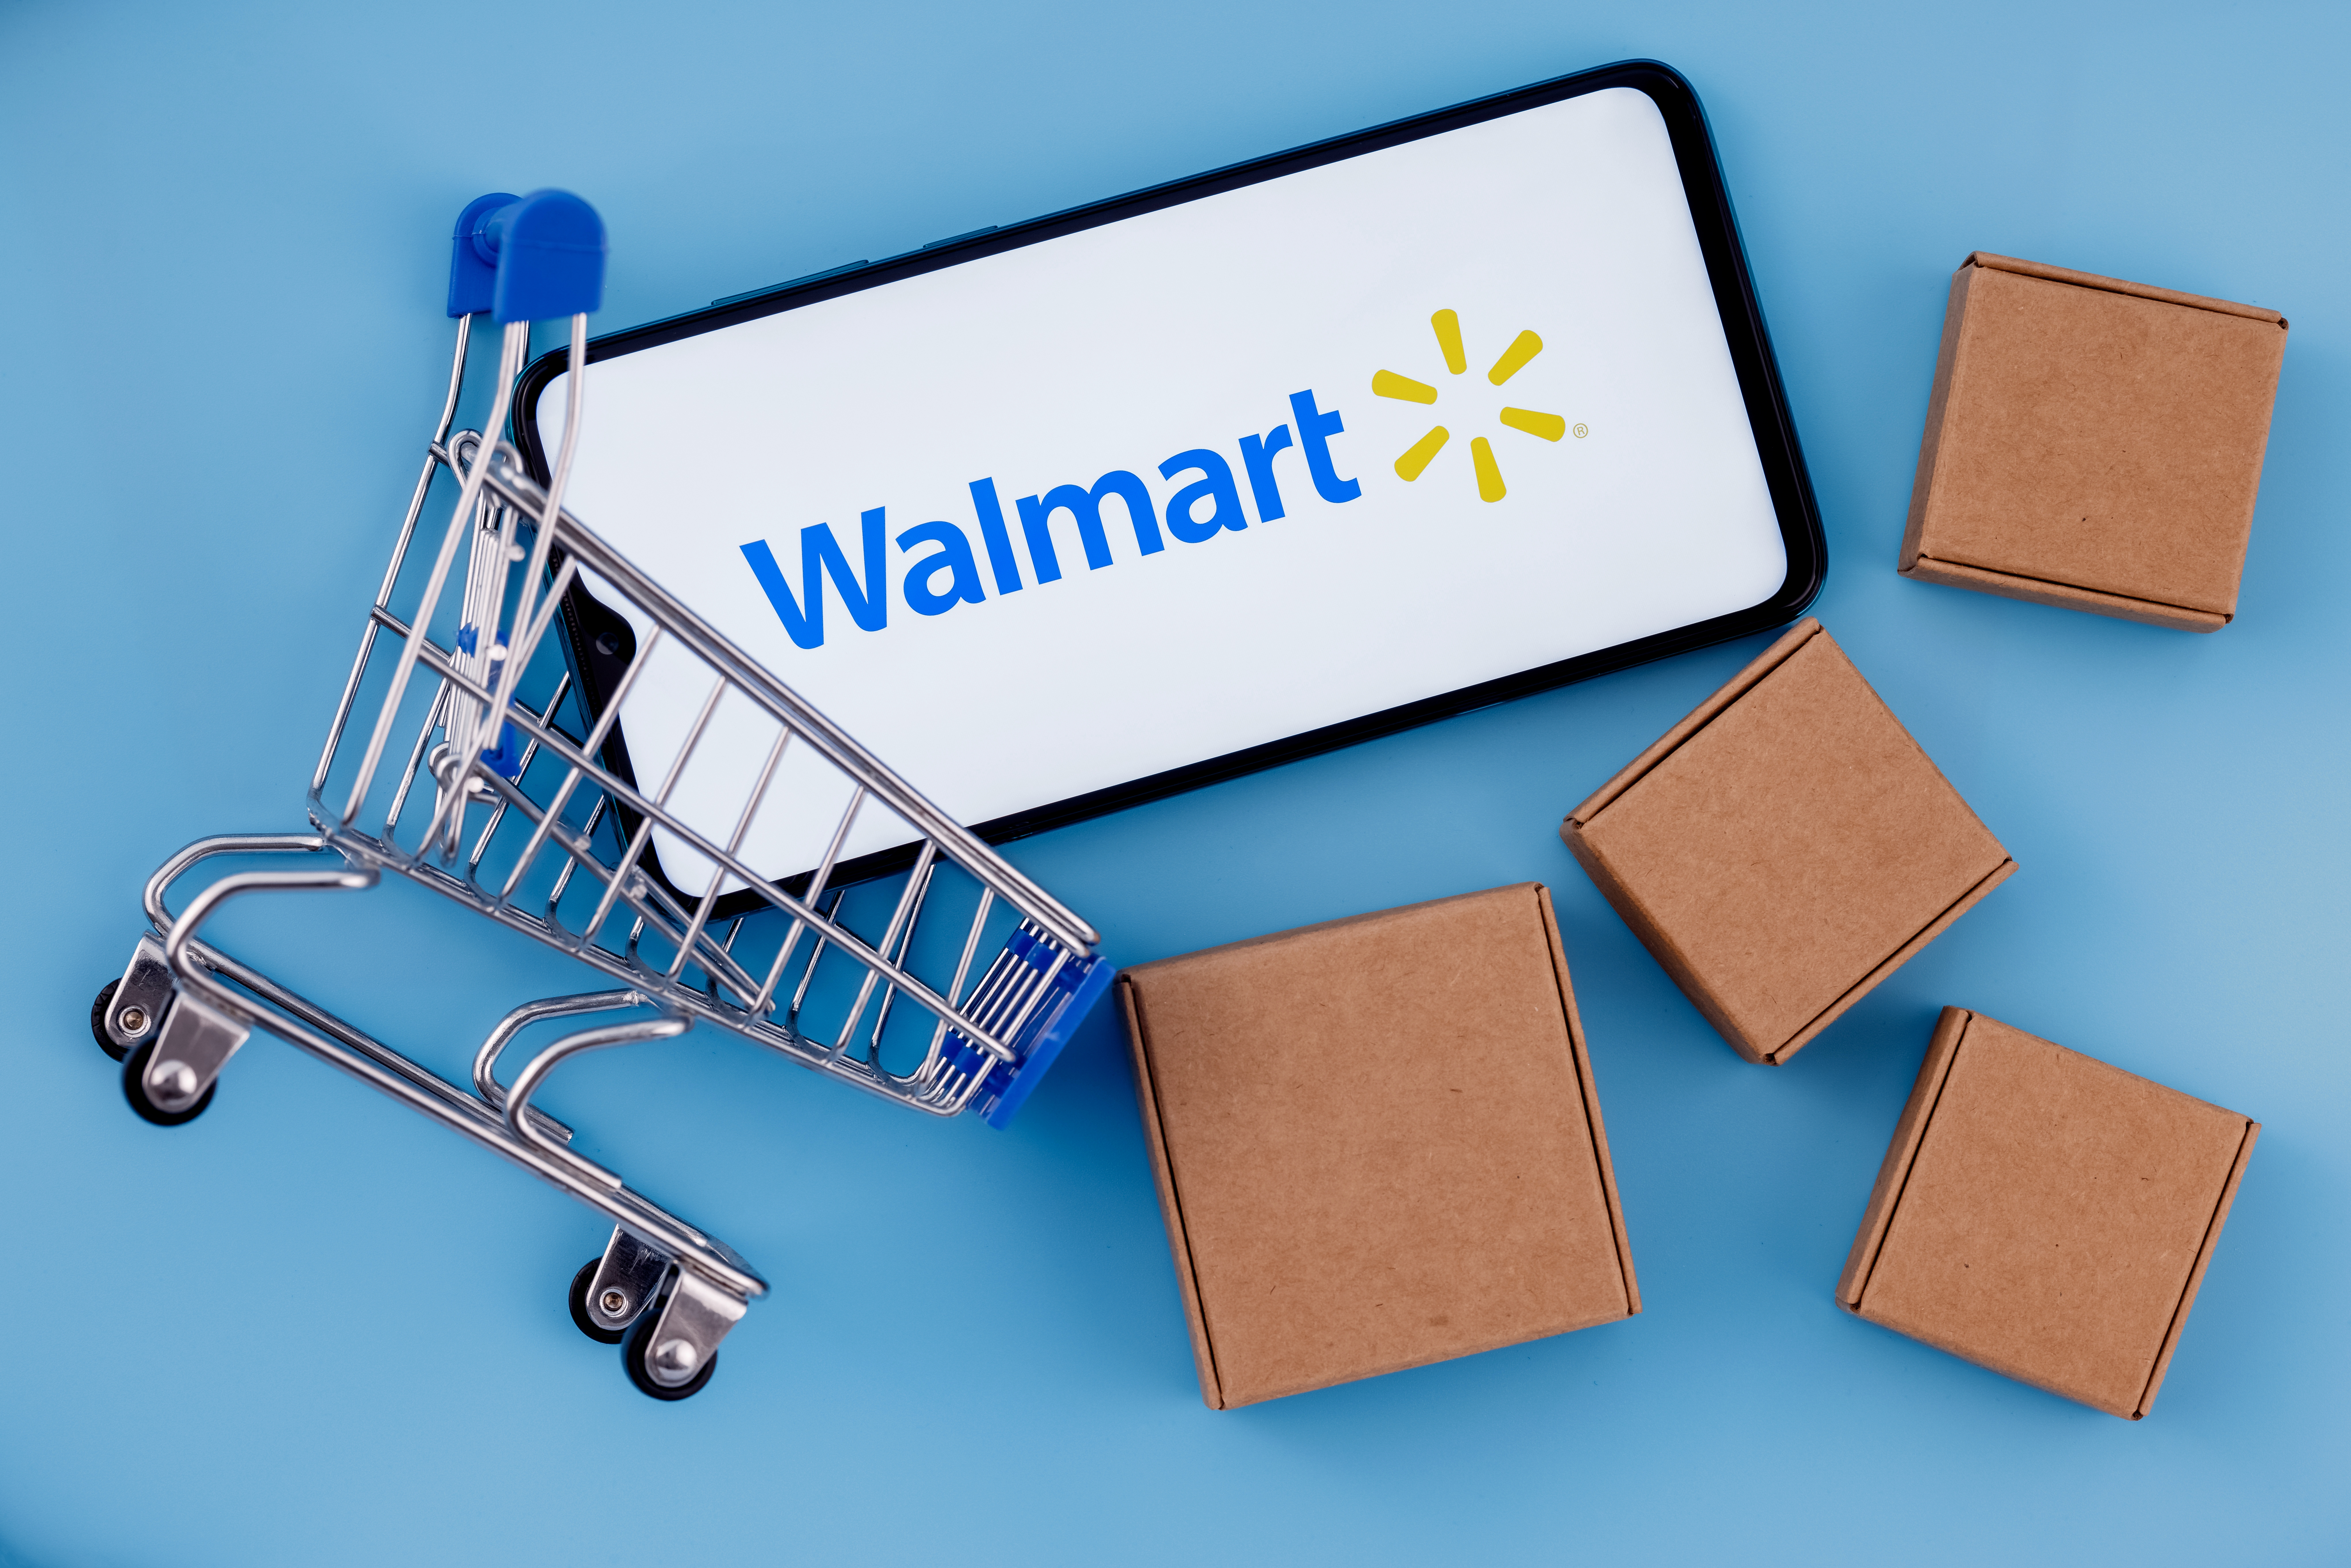 Smartphone with the Walmart logo on it in a small shopping cart next to cardboard boxes